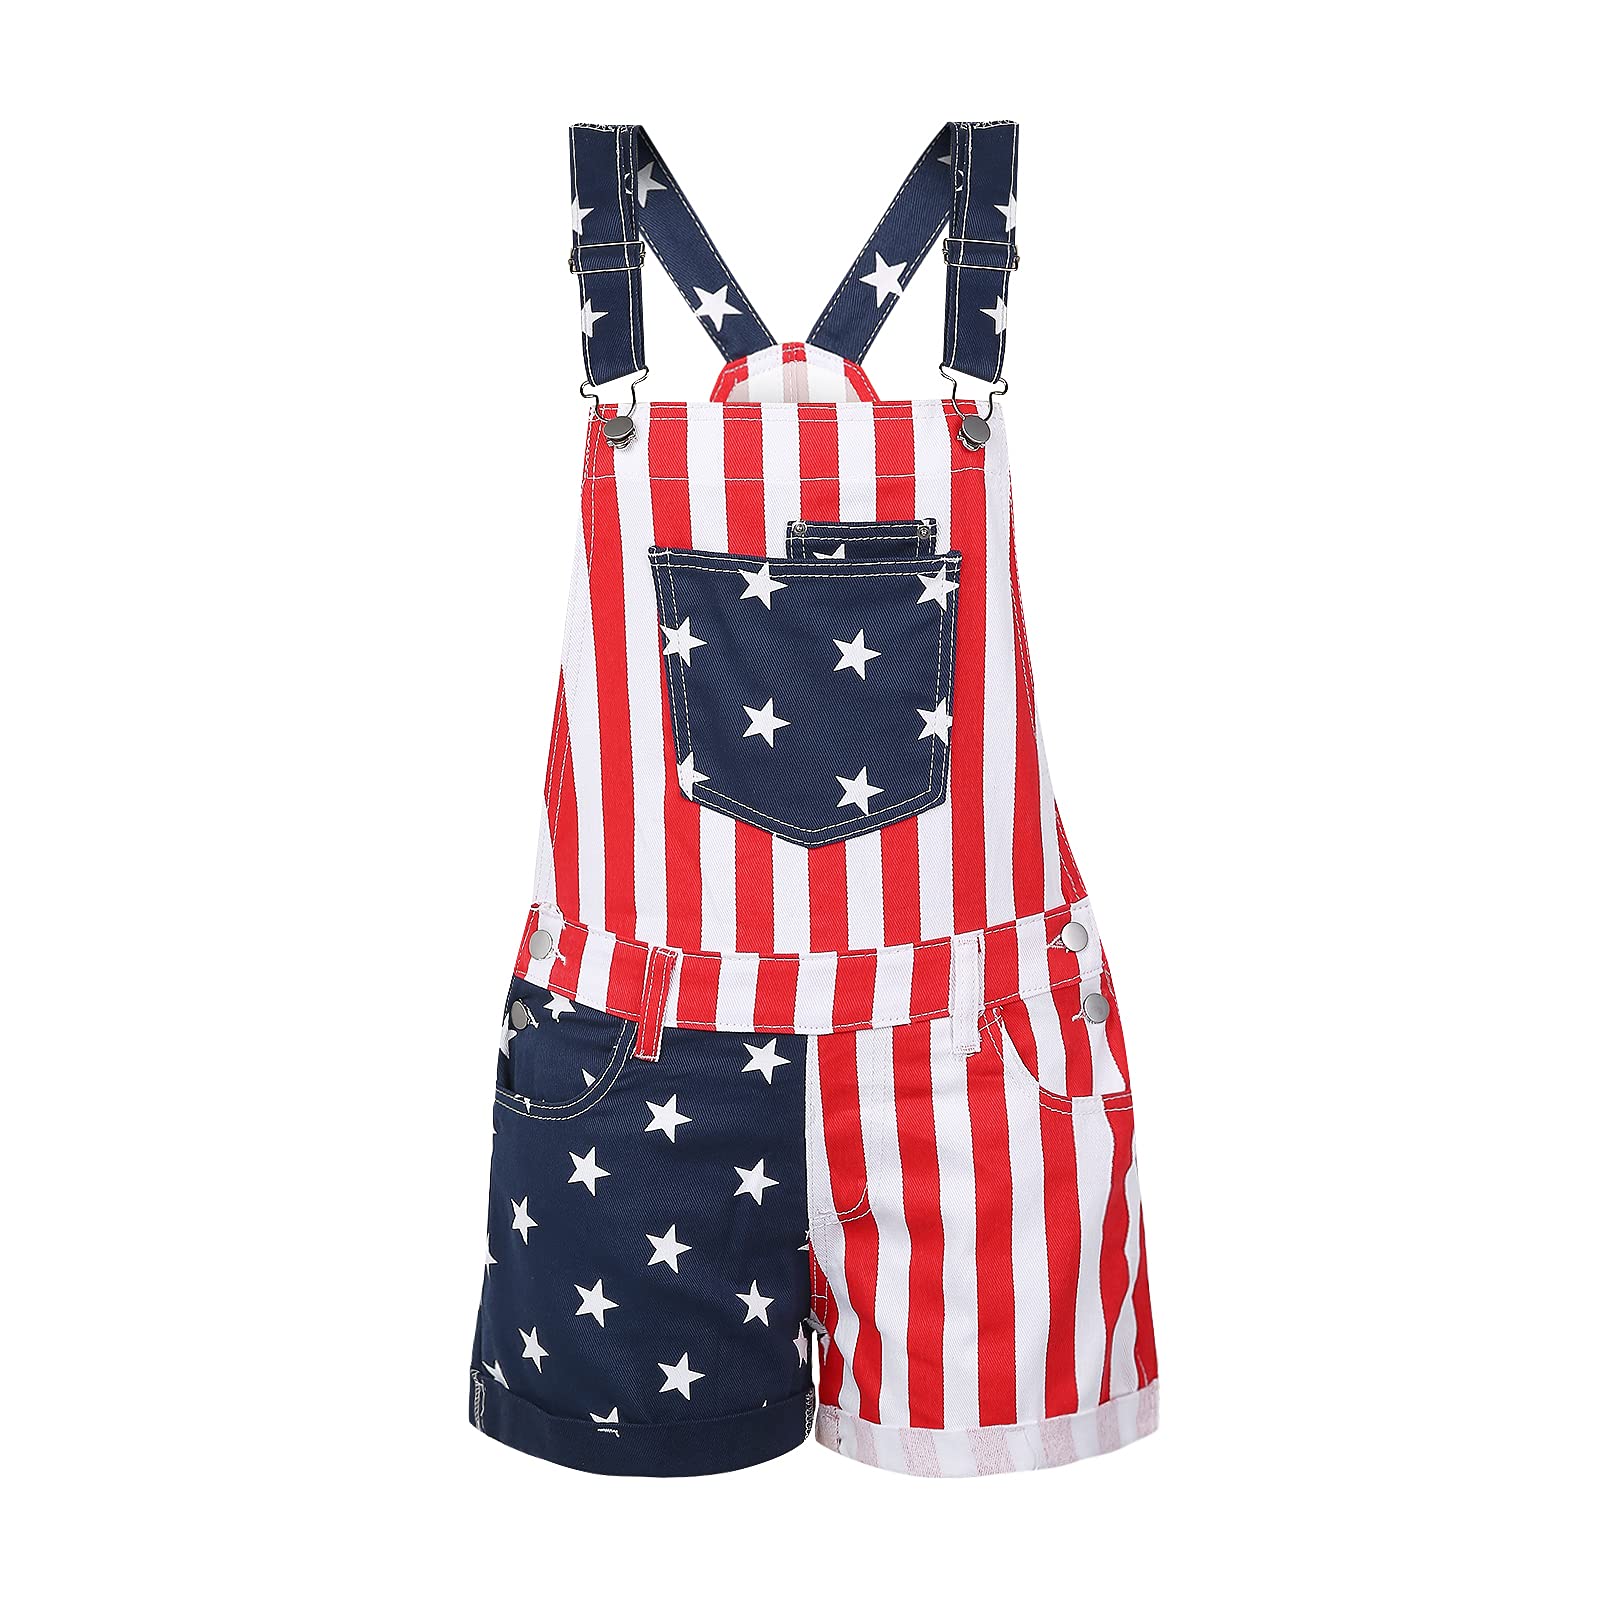 Women 4th Of July Star Print Short Overall